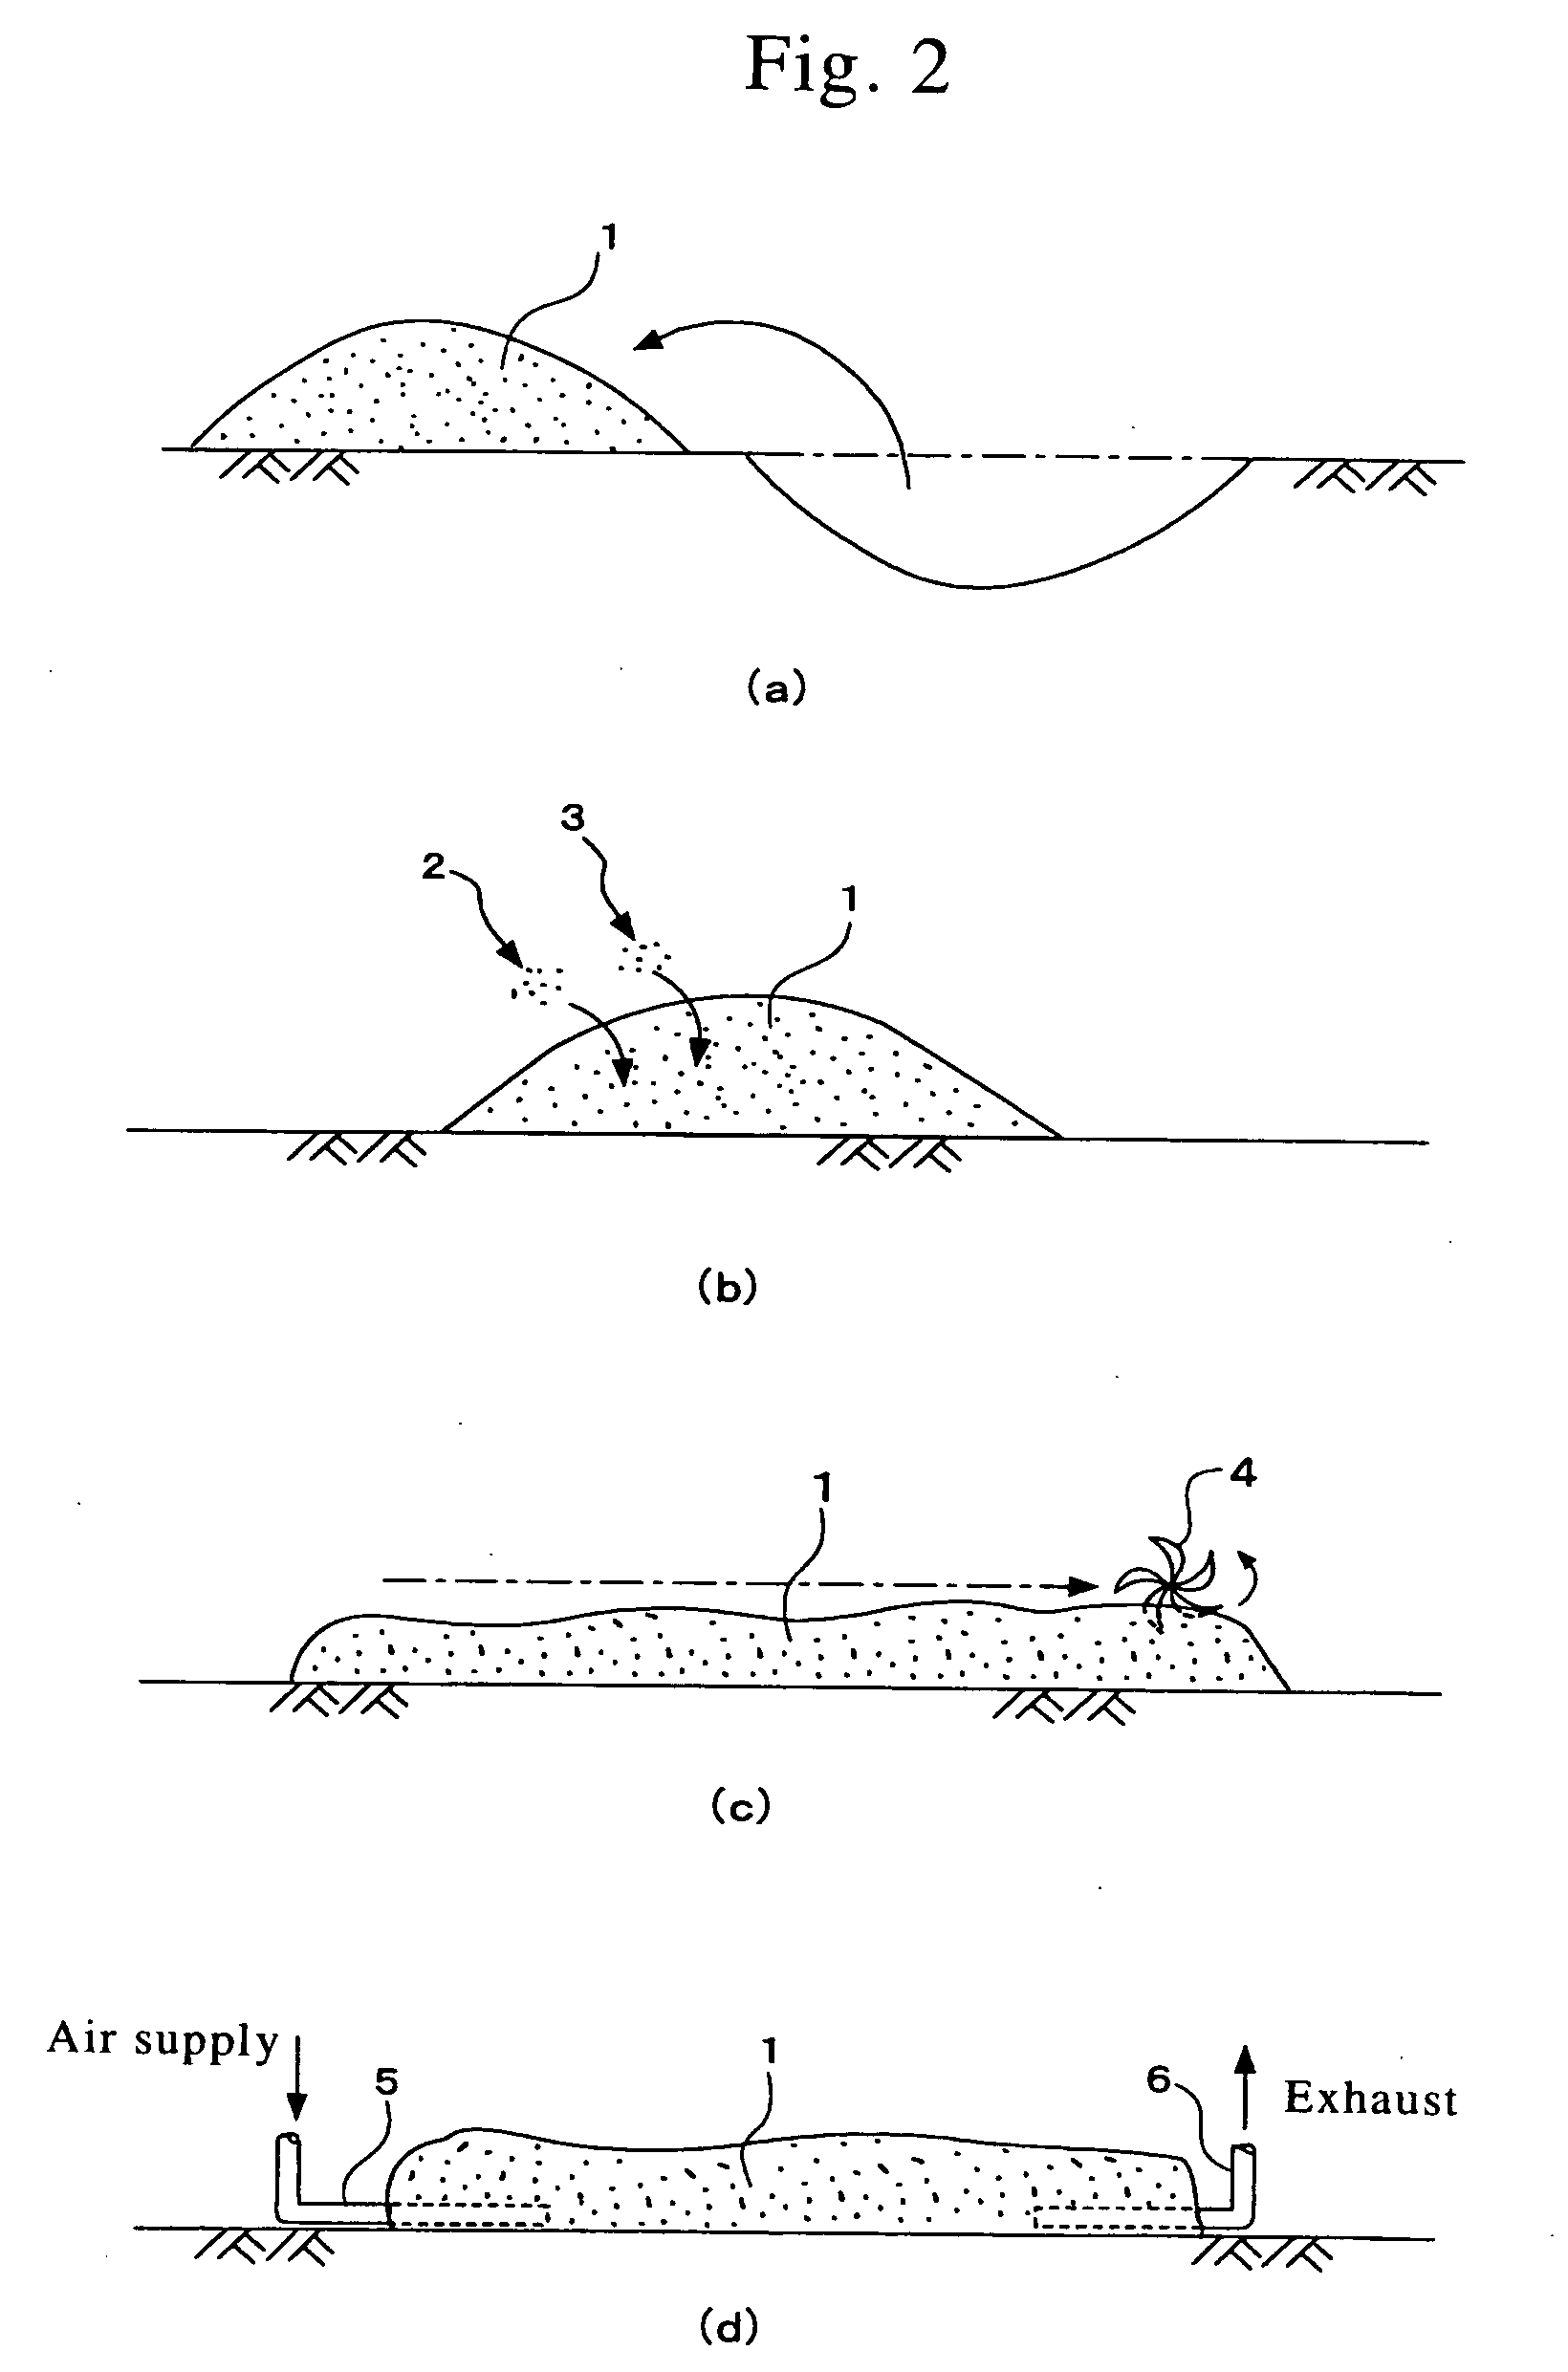 Method of purifying contaminated soil using microorganism